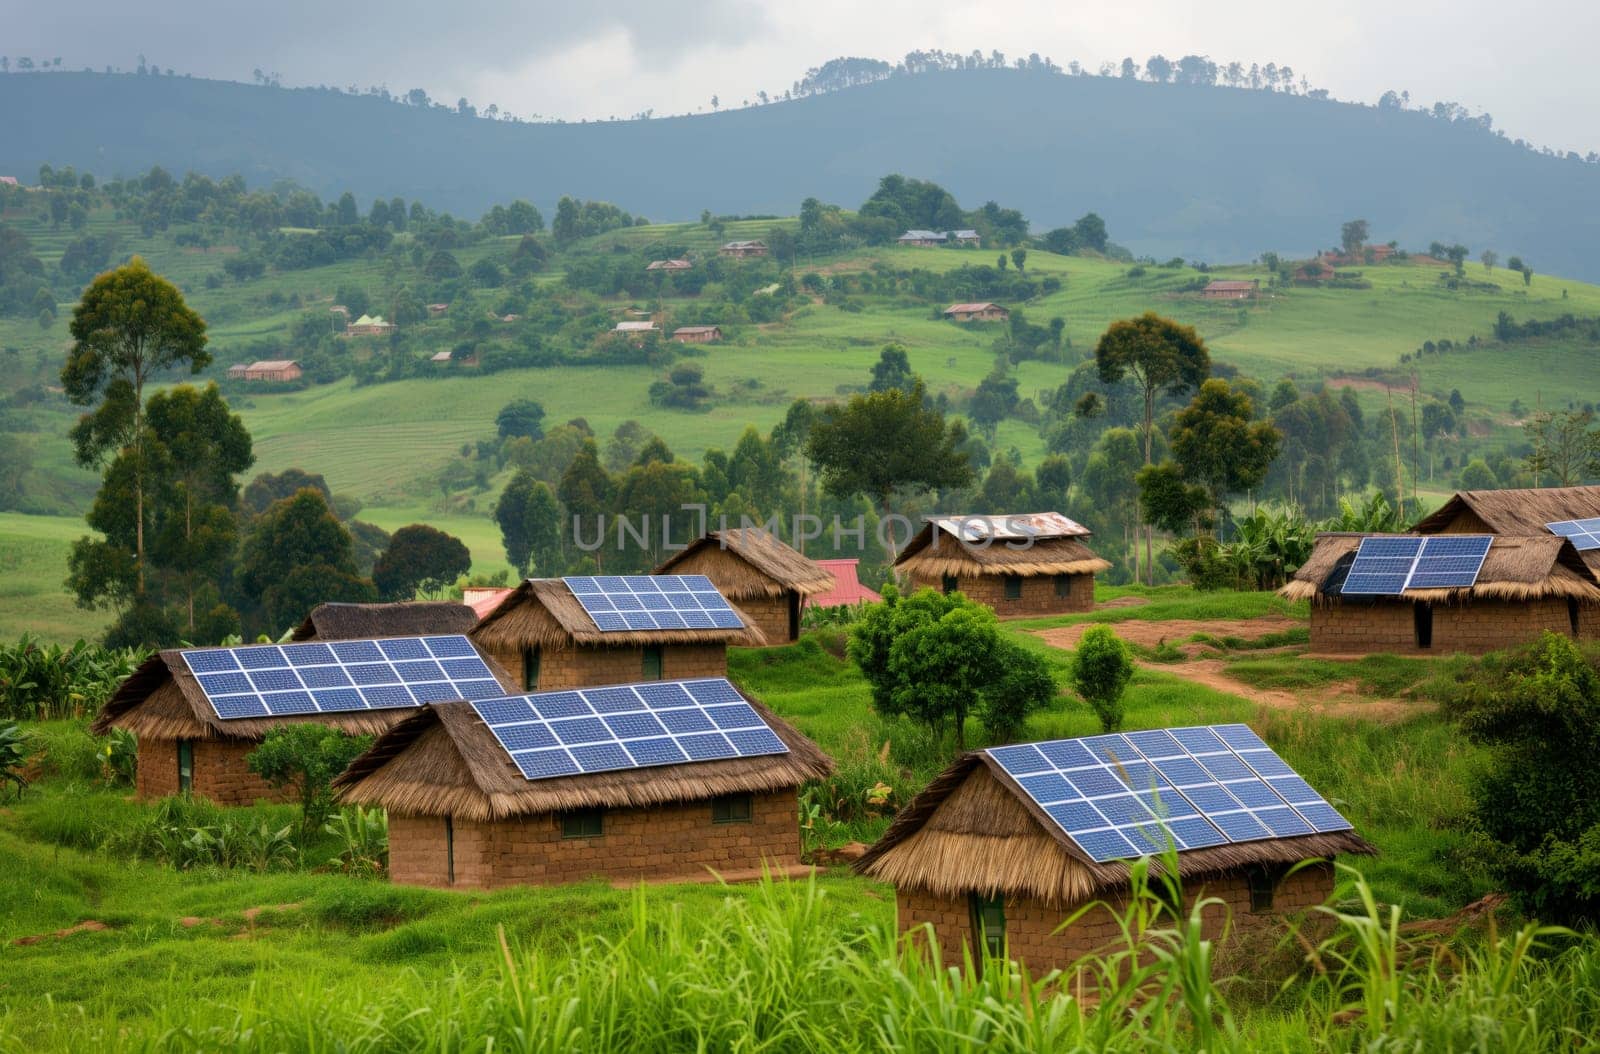 Rural African landscape with mud houses topped with solar panels, showcasing sustainable energy use in a green hilly environment